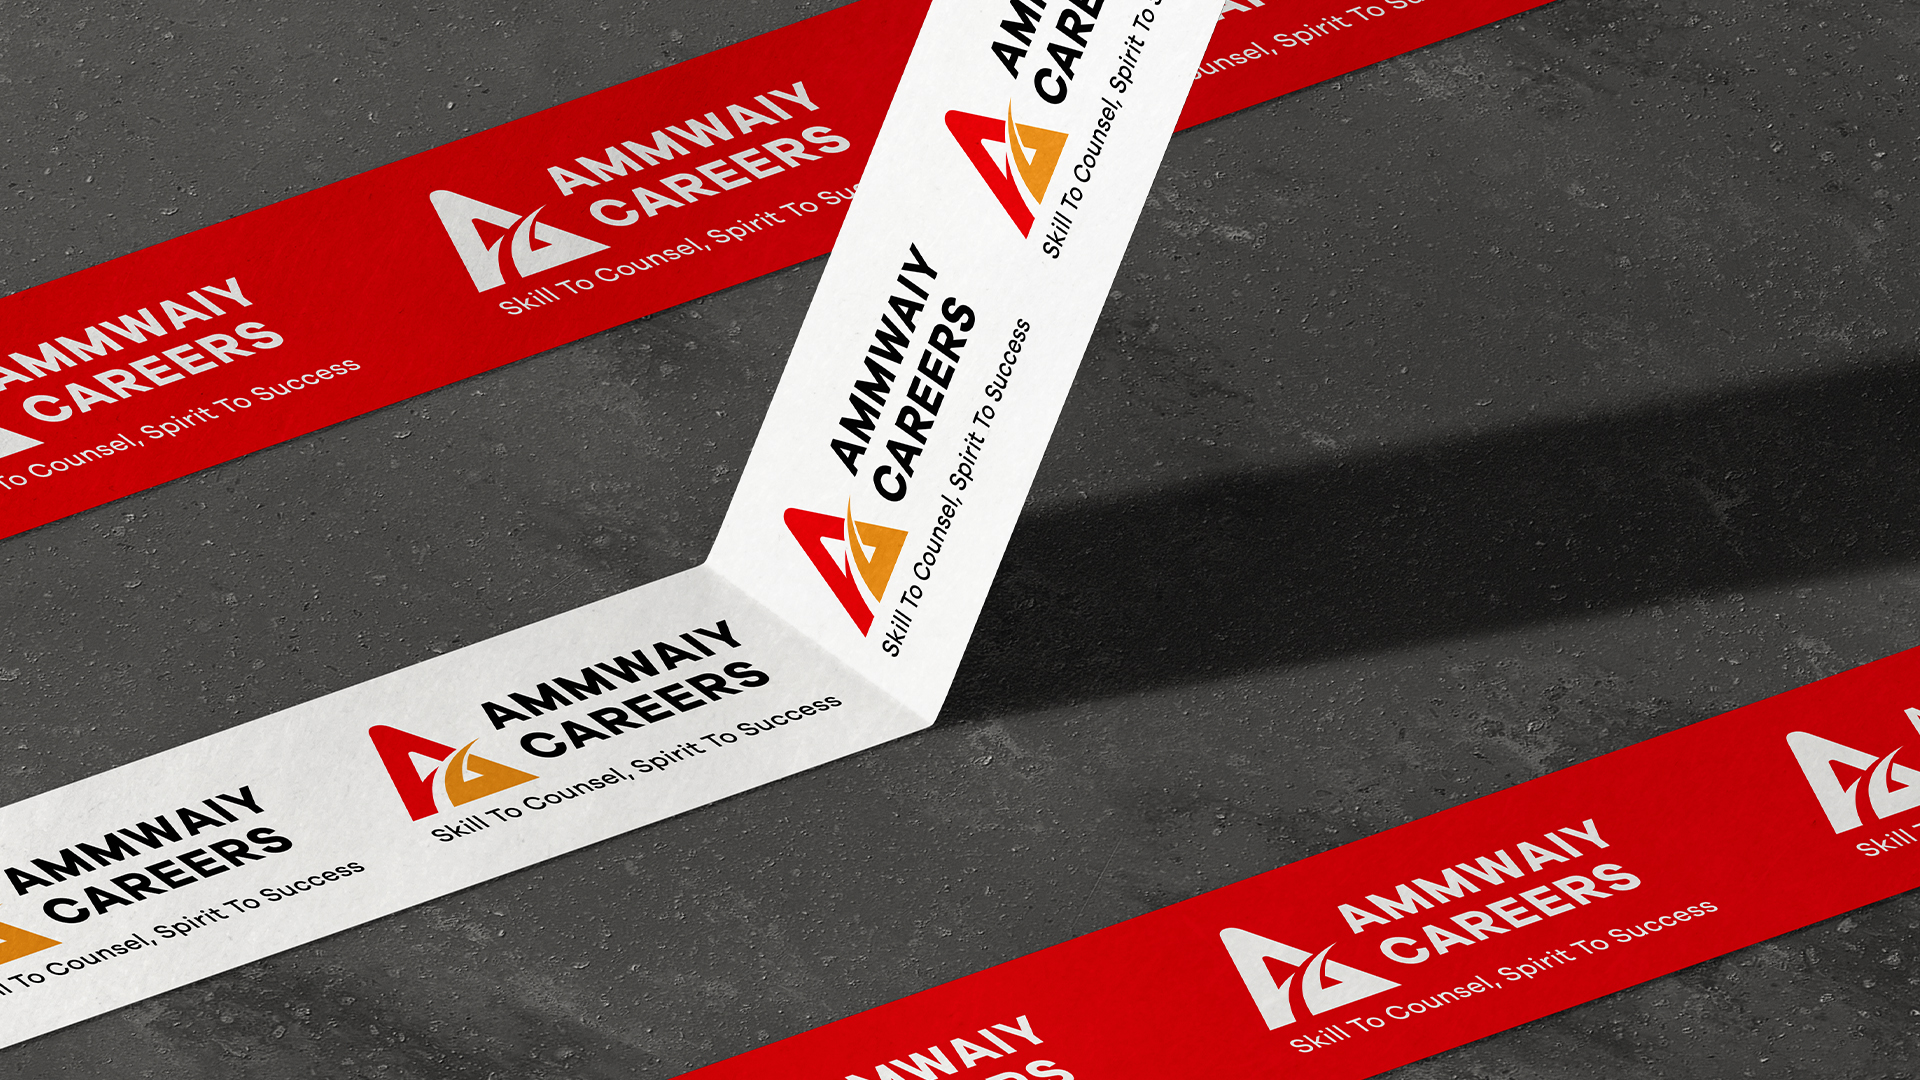 Ammwaiy Careers | Immigration Consultancy Branding in Chandigarh | Media Wall Street